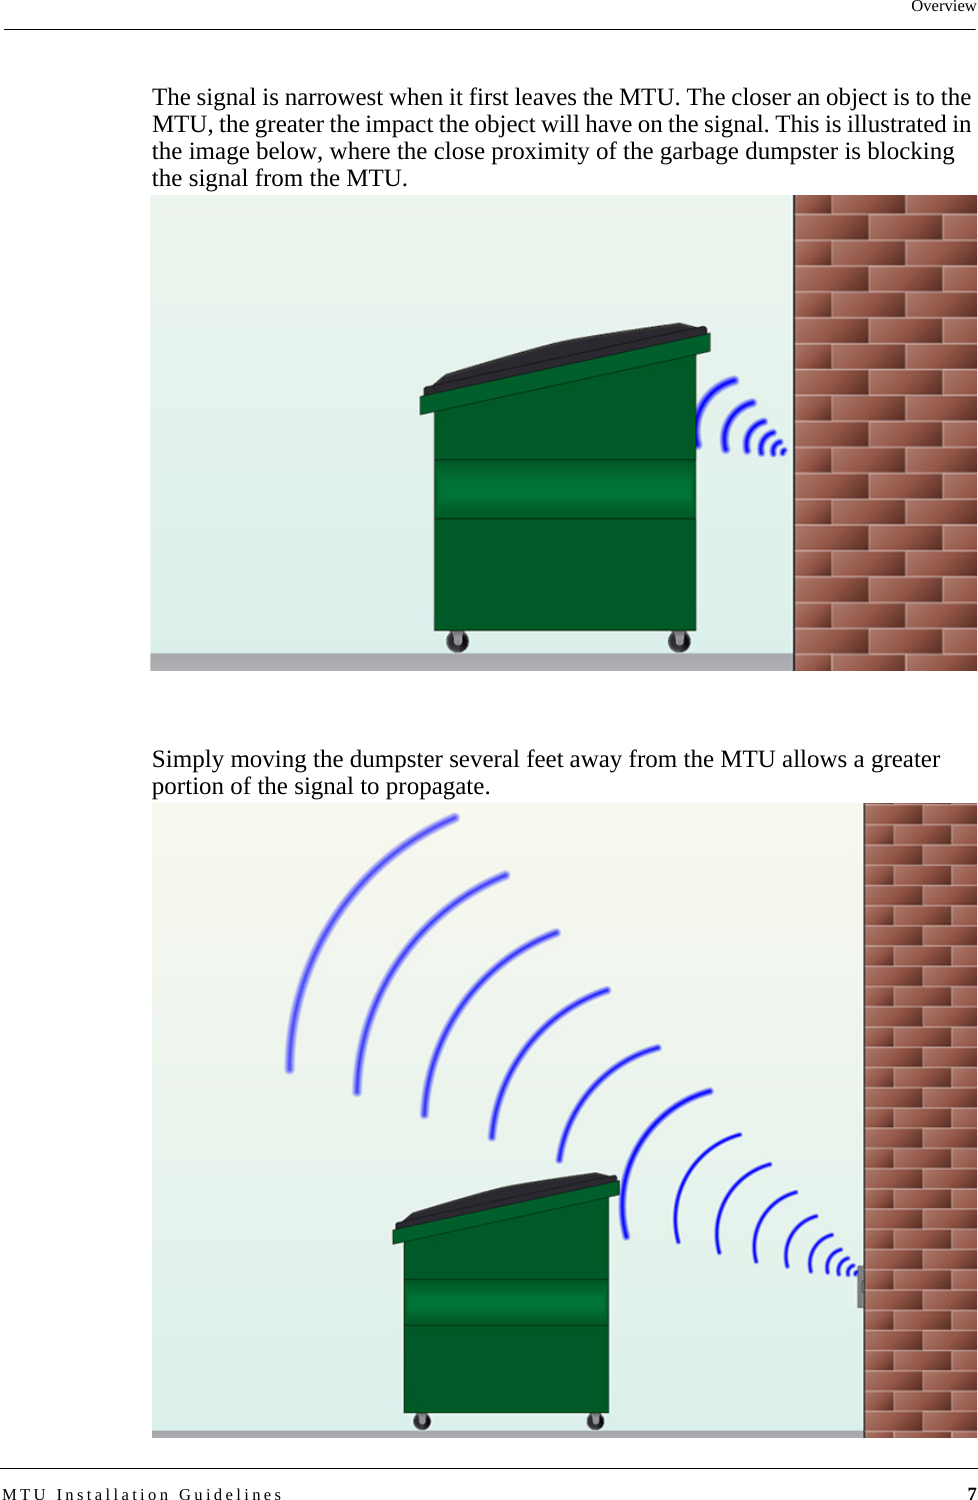 OverviewMTU Installation Guidelines 7The signal is narrowest when it first leaves the MTU. The closer an object is to the MTU, the greater the impact the object will have on the signal. This is illustrated in the image below, where the close proximity of the garbage dumpster is blocking the signal from the MTU.Simply moving the dumpster several feet away from the MTU allows a greater portion of the signal to propagate.